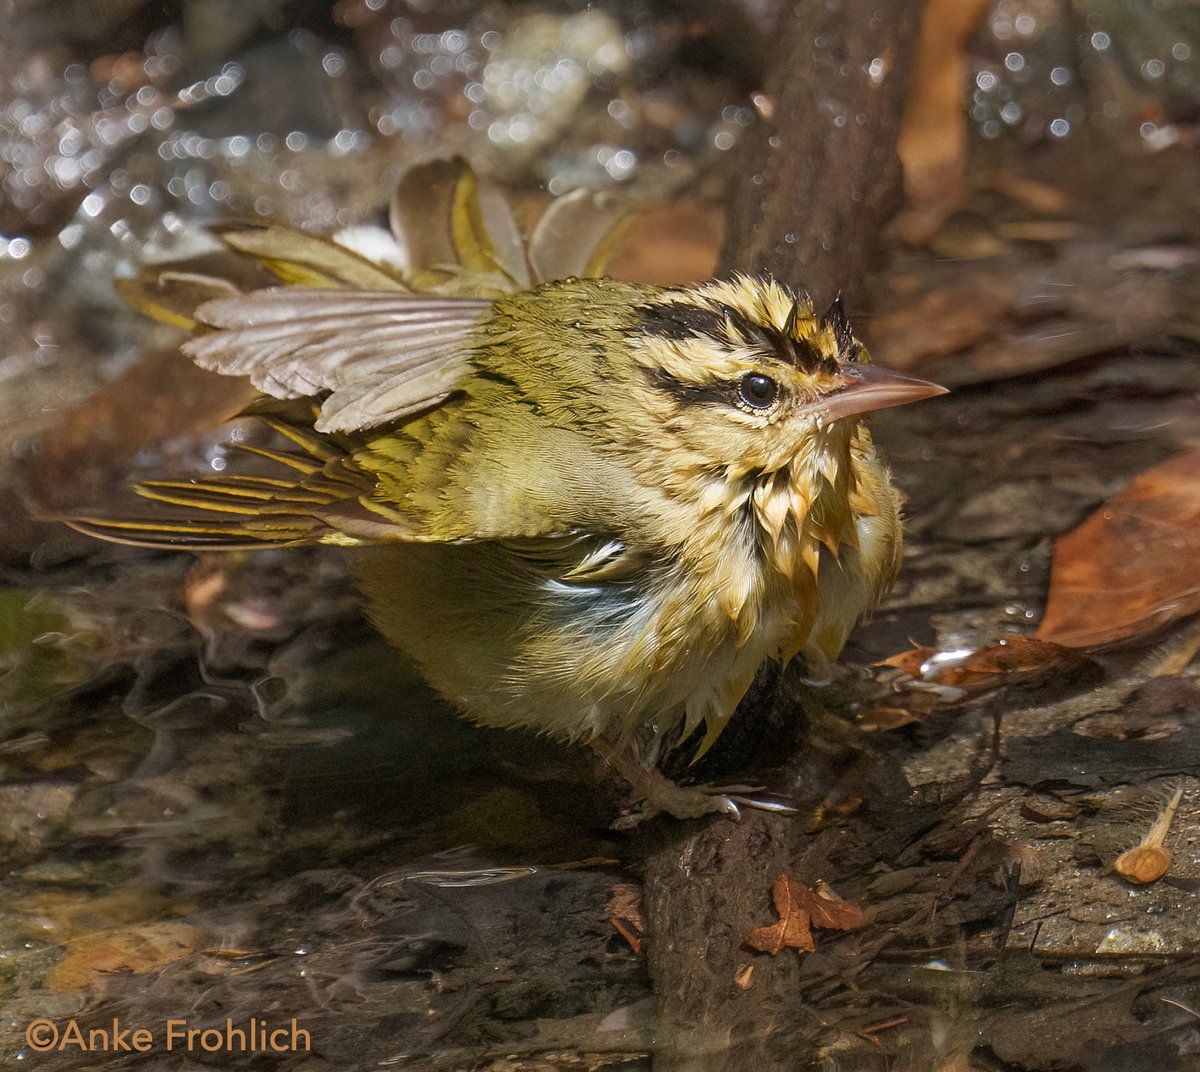 Worm-eating warbler drying off after a thorough bath in the Ramble. The wet look suits him very well 😍

#nyc #CentralPark #birdcpp #birdwatching #inaturalist #springmigration